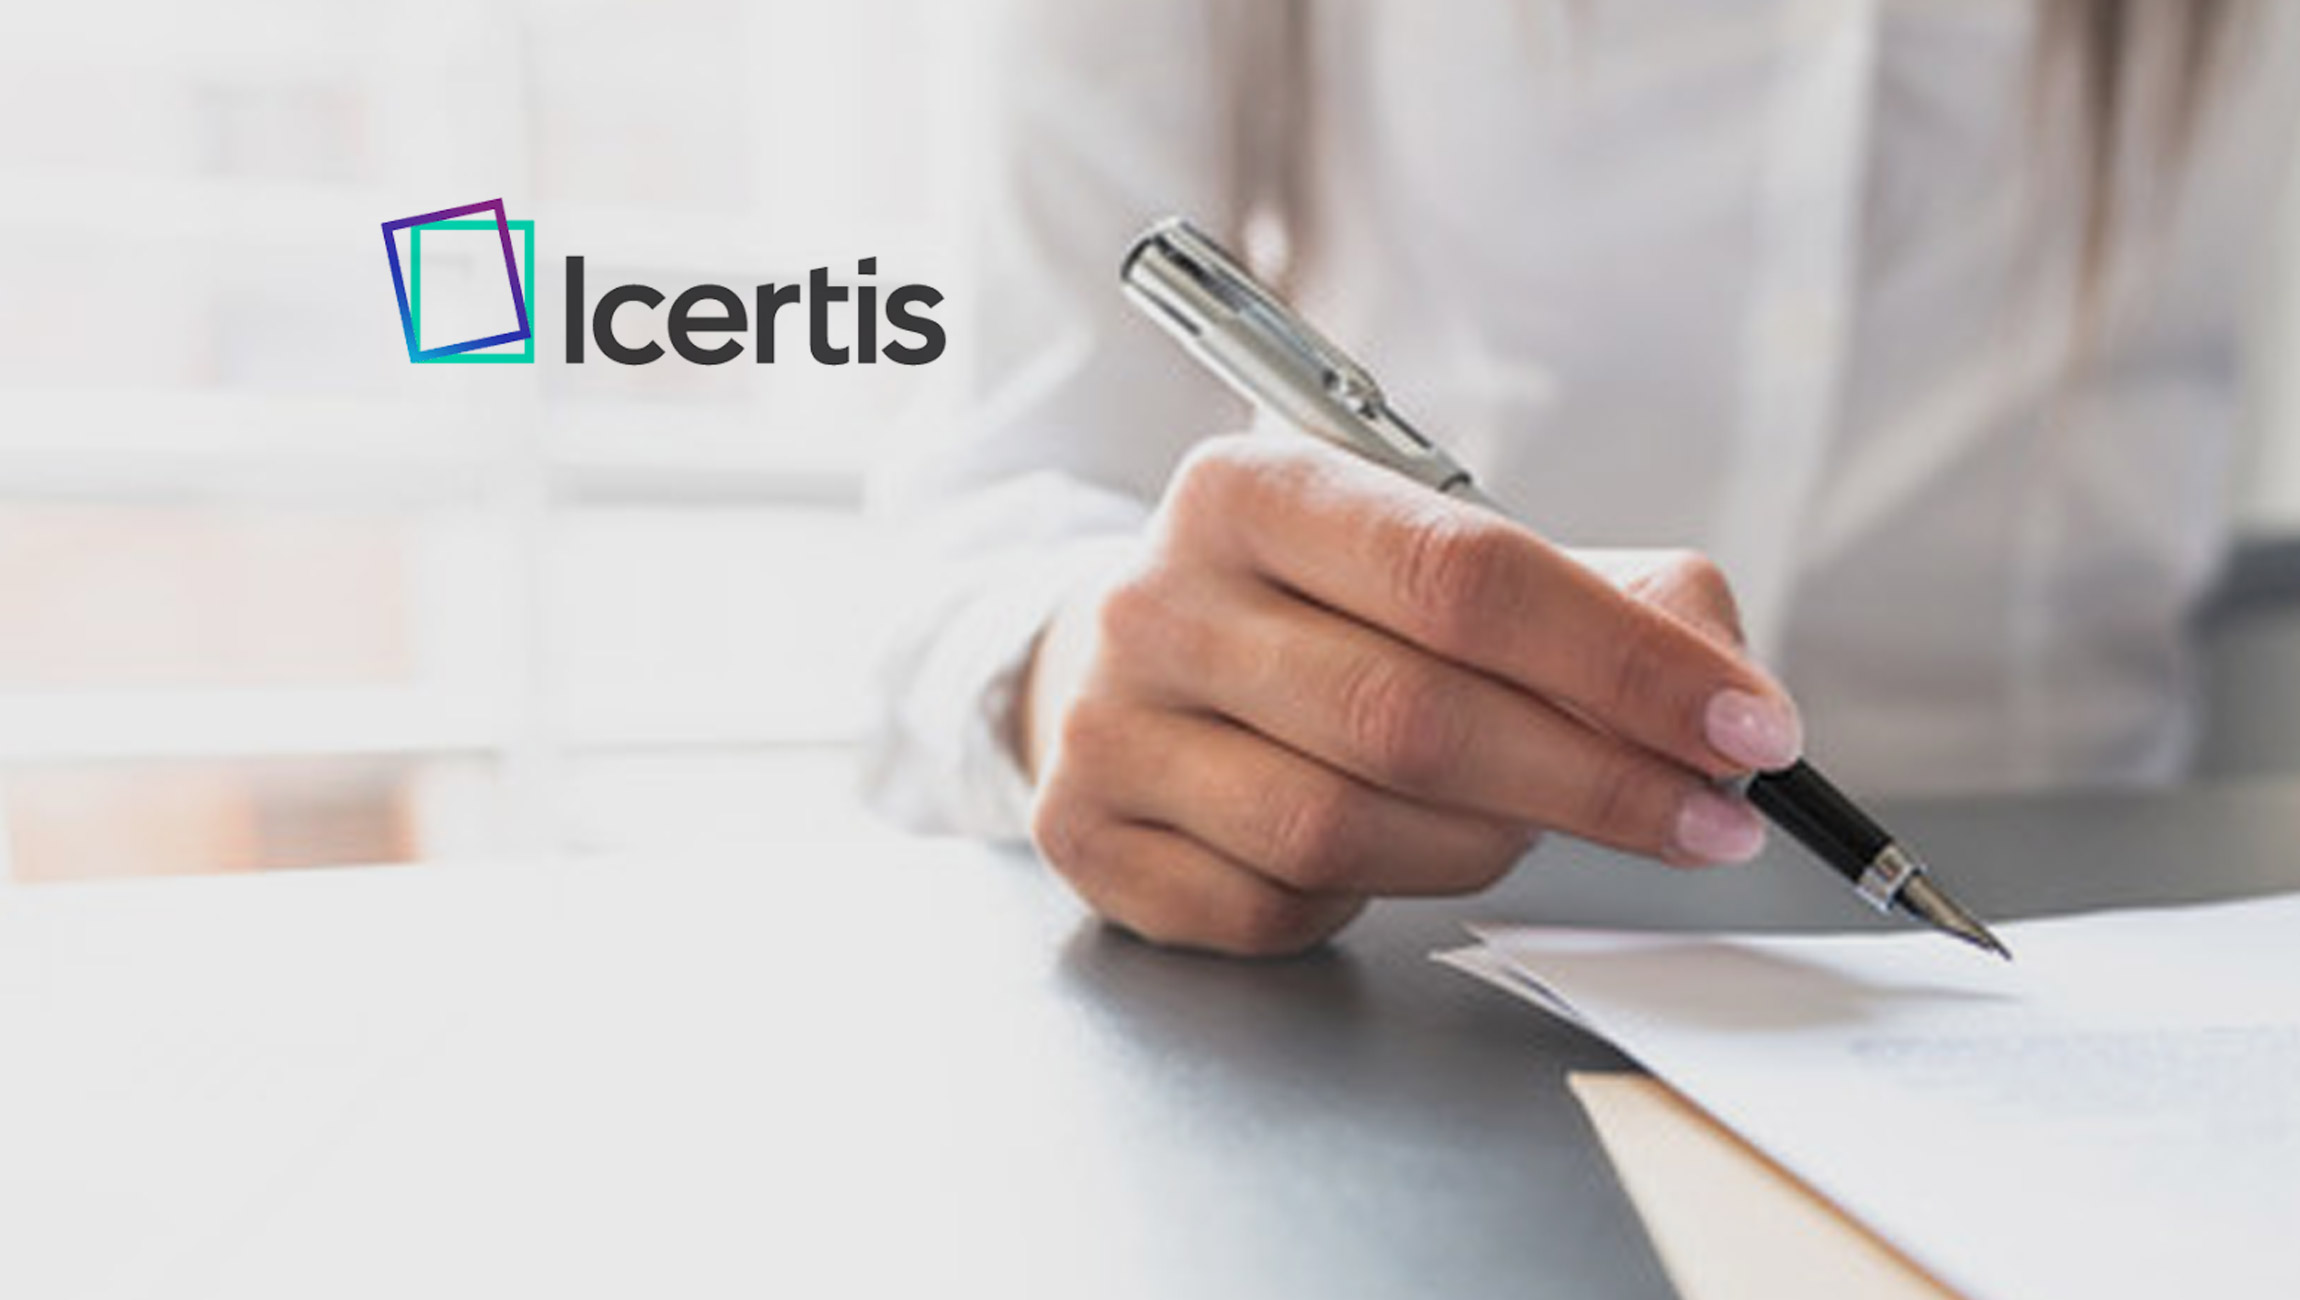 Biopharmaceutical Company Achieves Contract Management Transformation Goals with Icertis Contract Intelligence